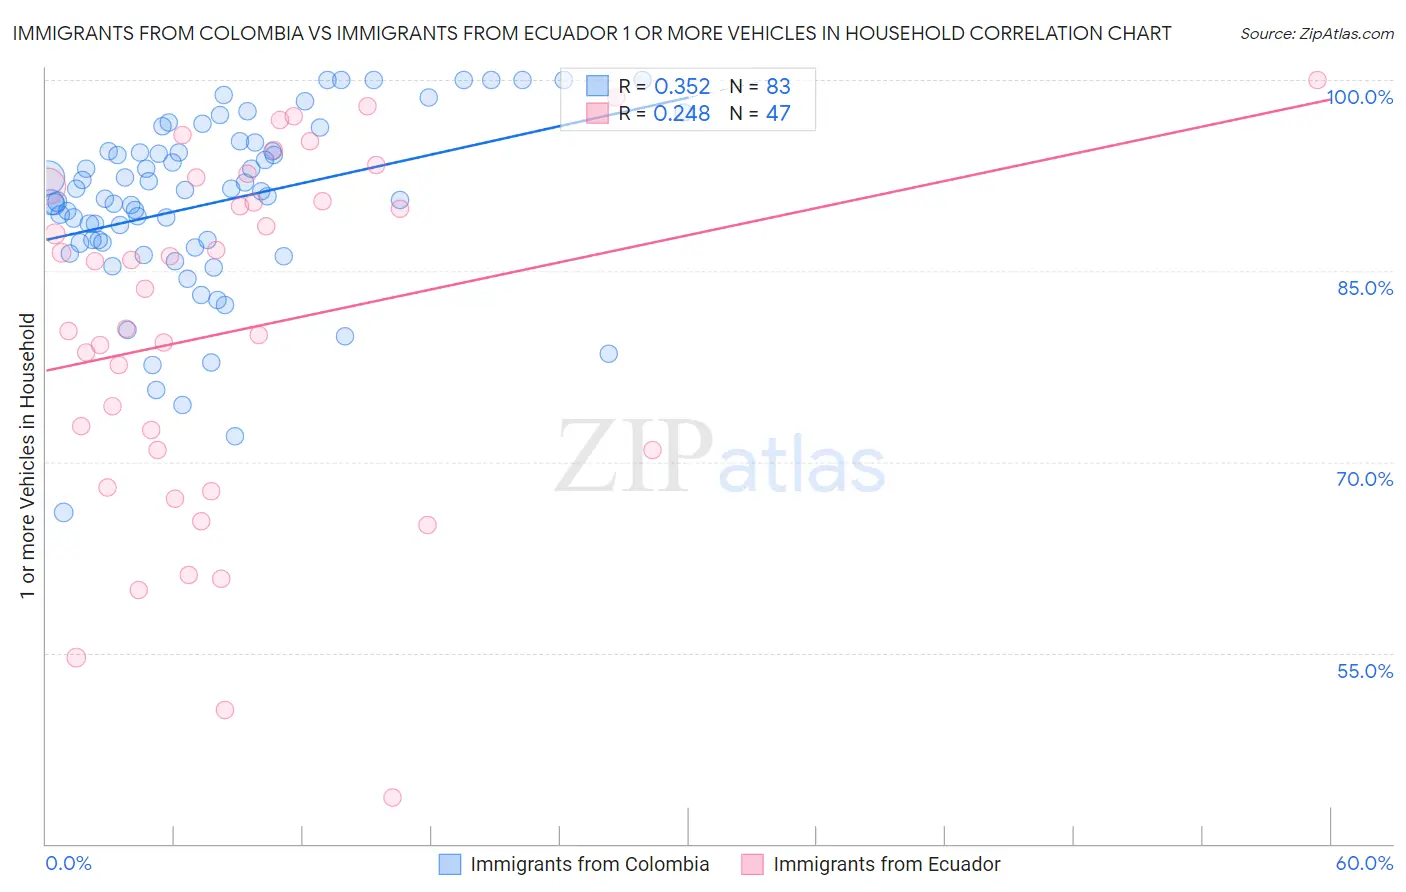 Immigrants from Colombia vs Immigrants from Ecuador 1 or more Vehicles in Household